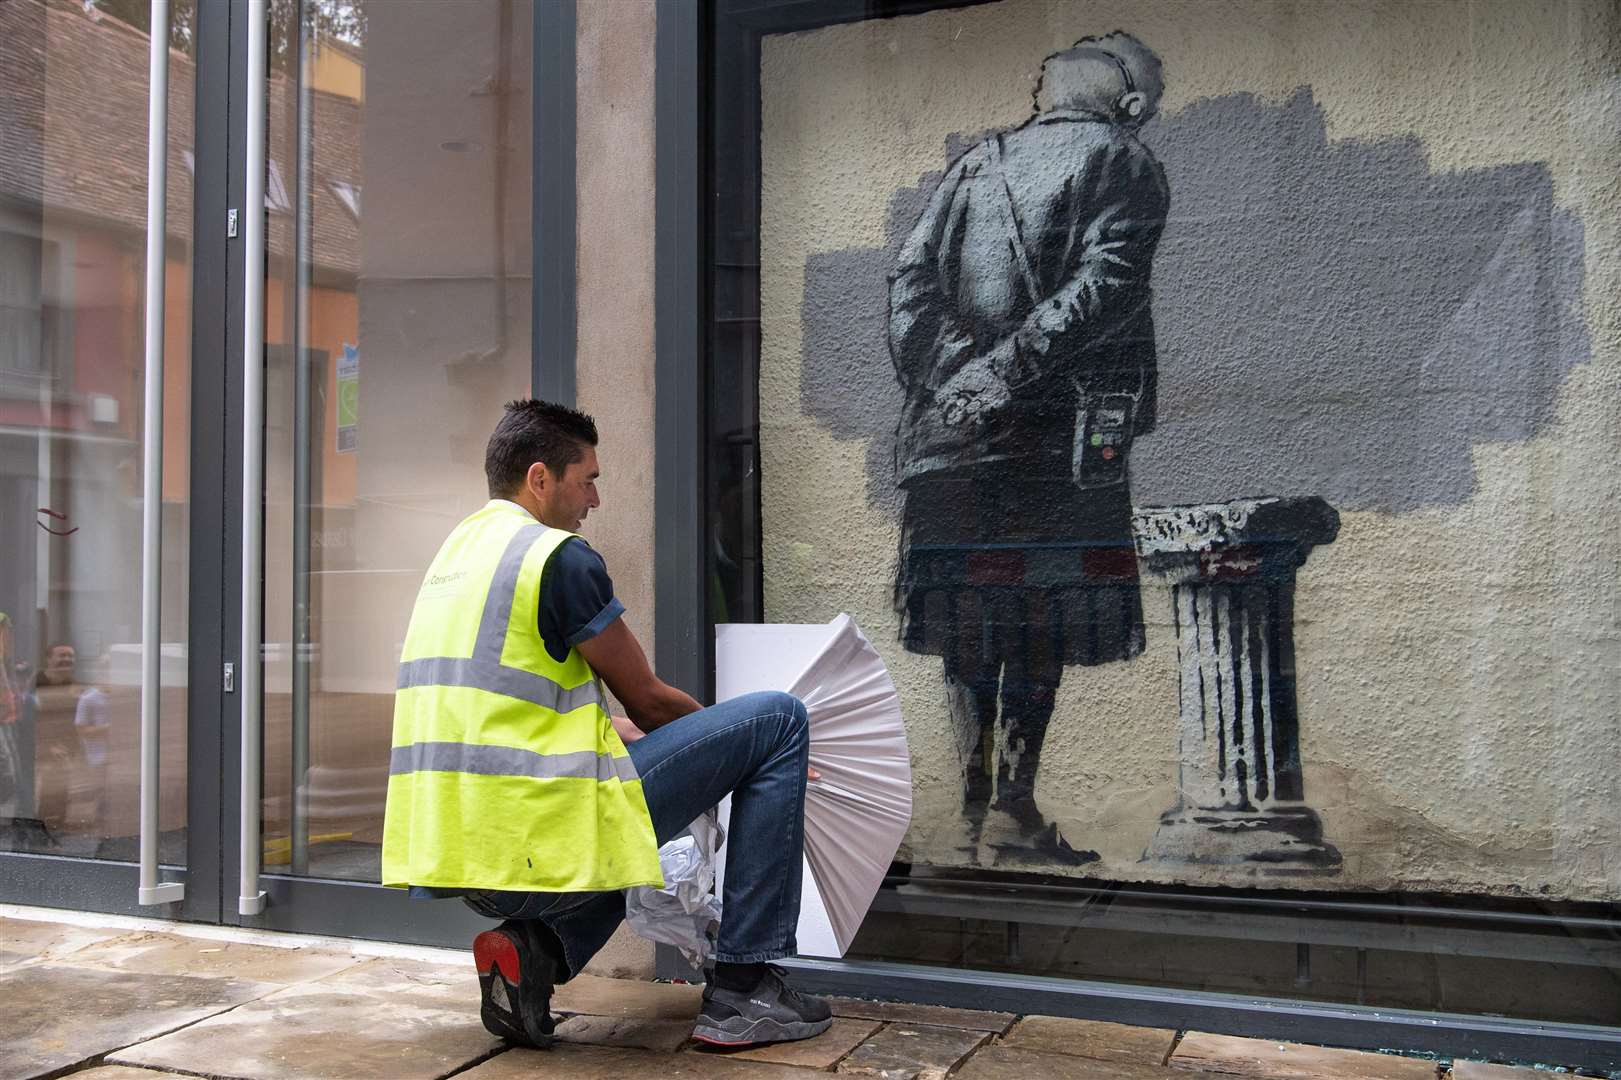 The work that inspired it all - Art Buff, a painting by street artist Banksy, is re-installed on Folkestone's Old High Street Picture: Matt Crossick/PA Wire